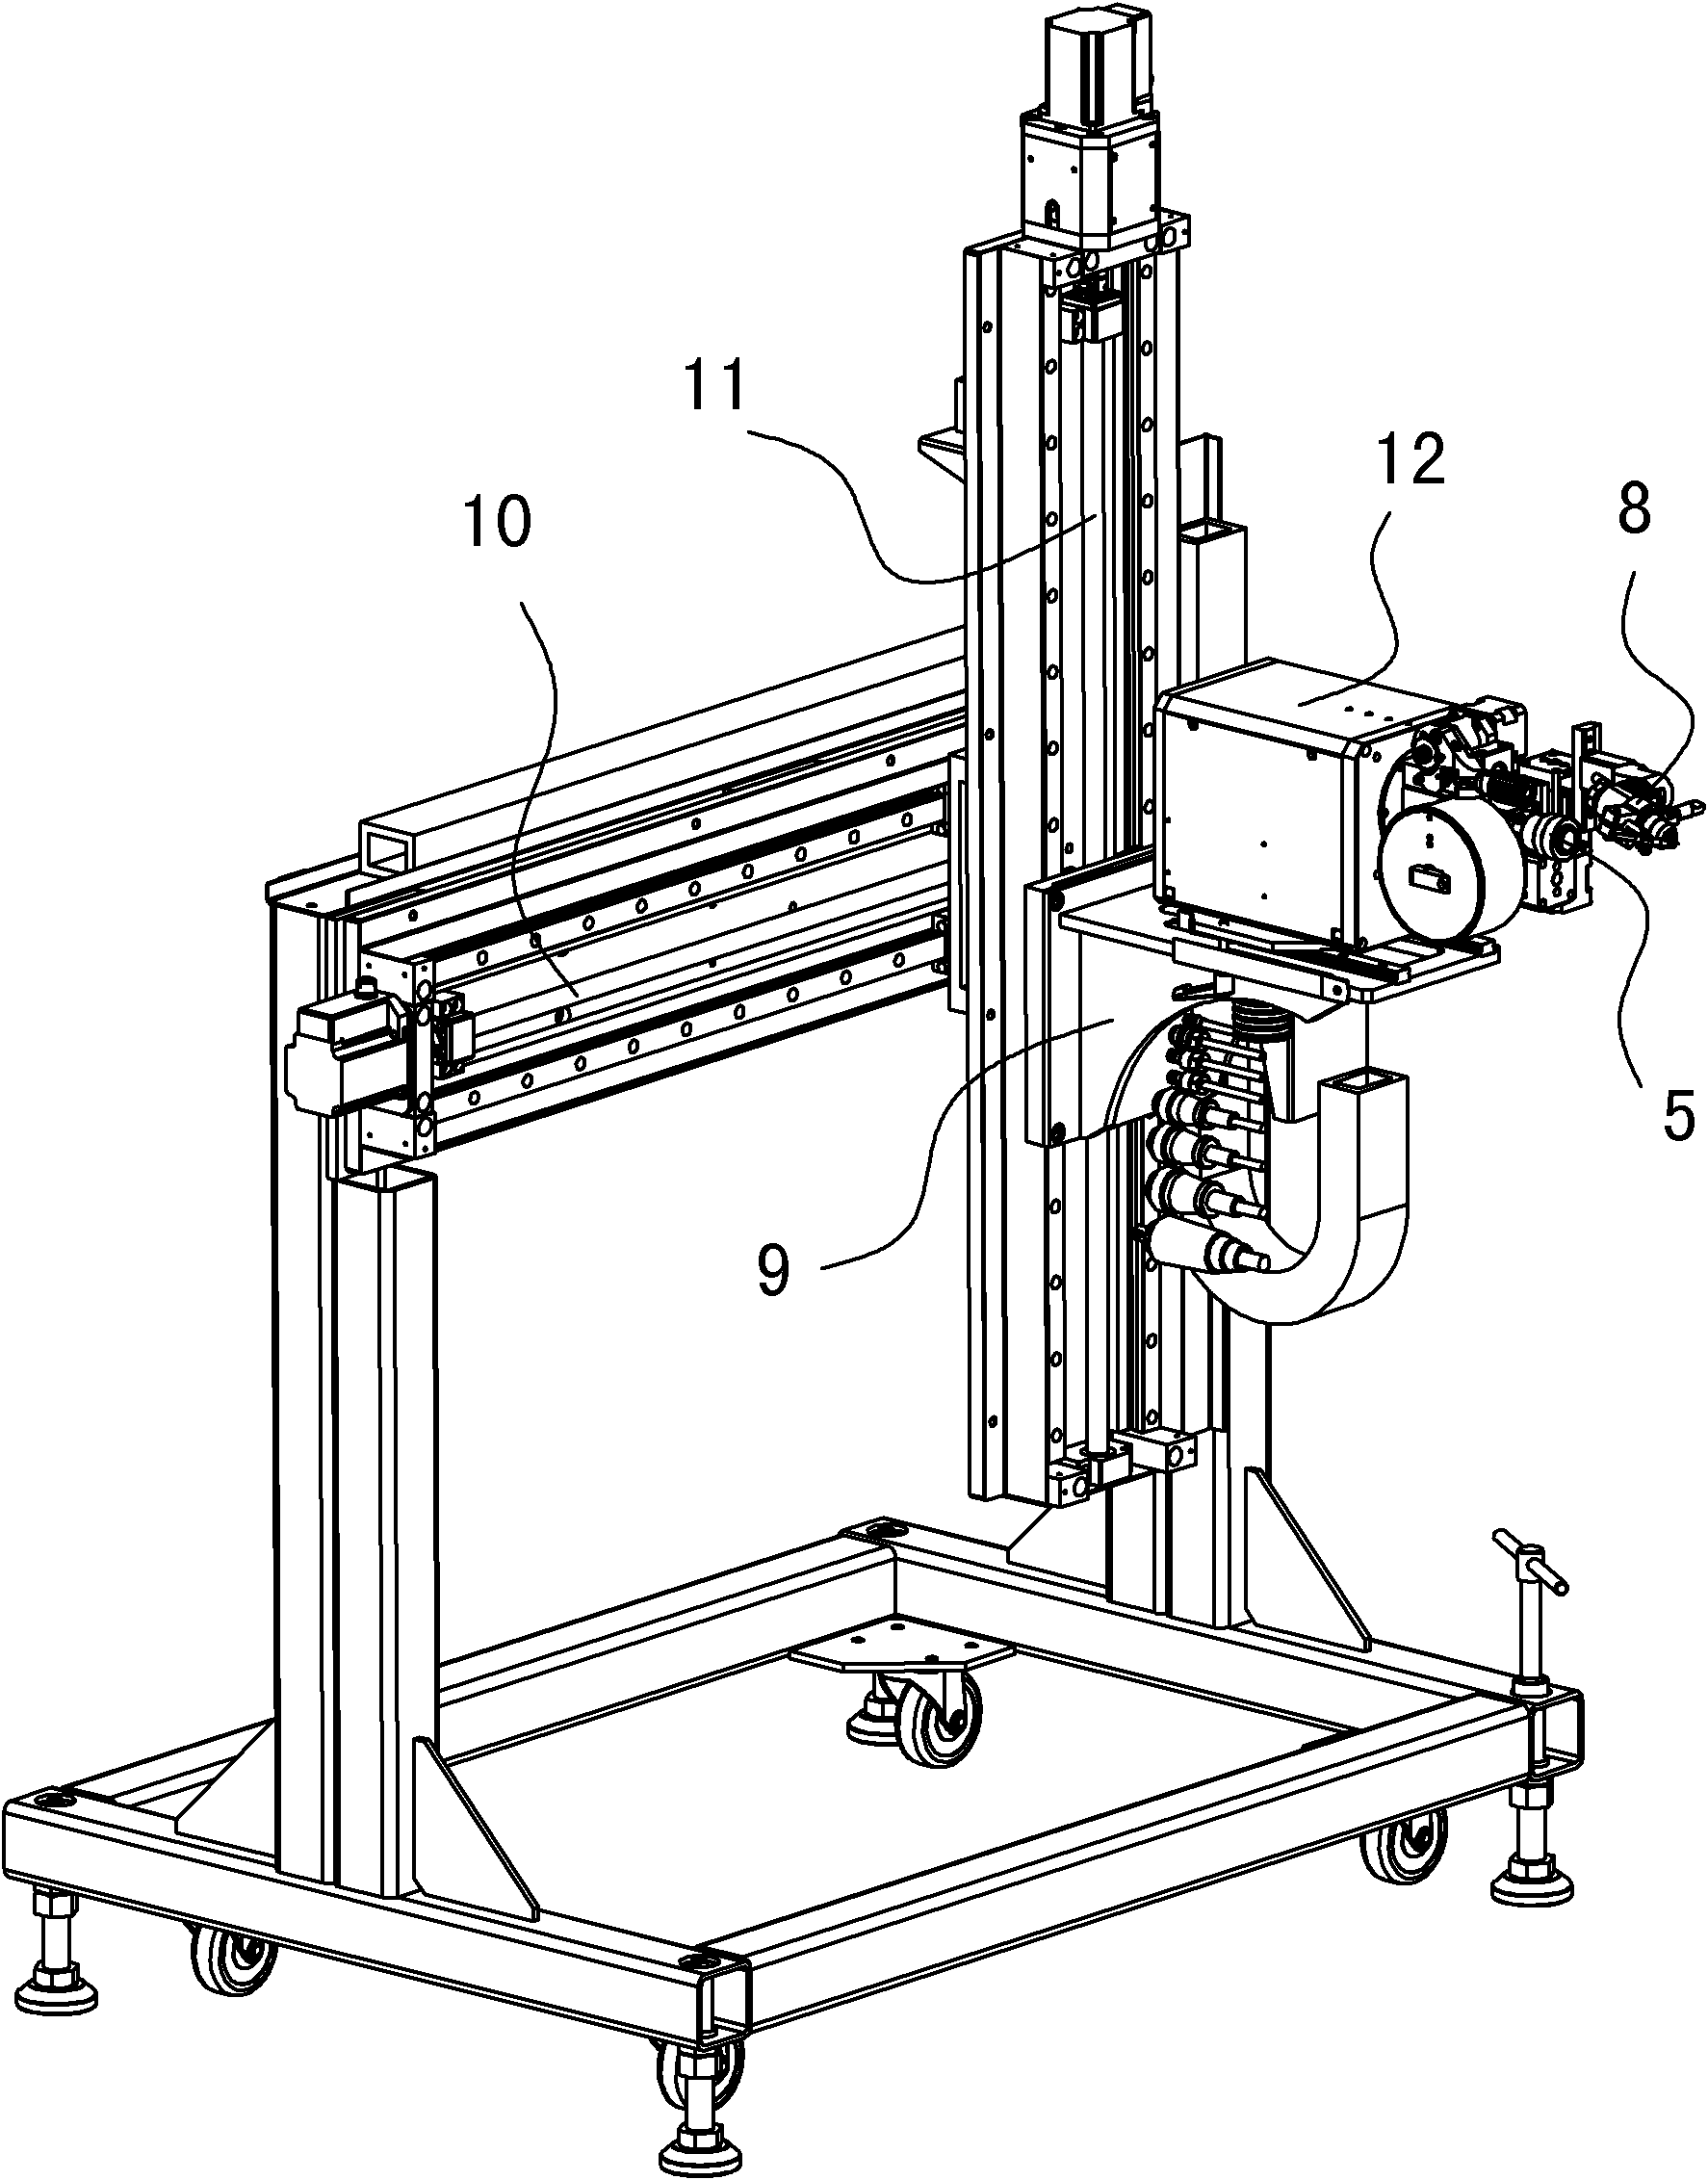 Image centralizing location method for automatic tube plate welding